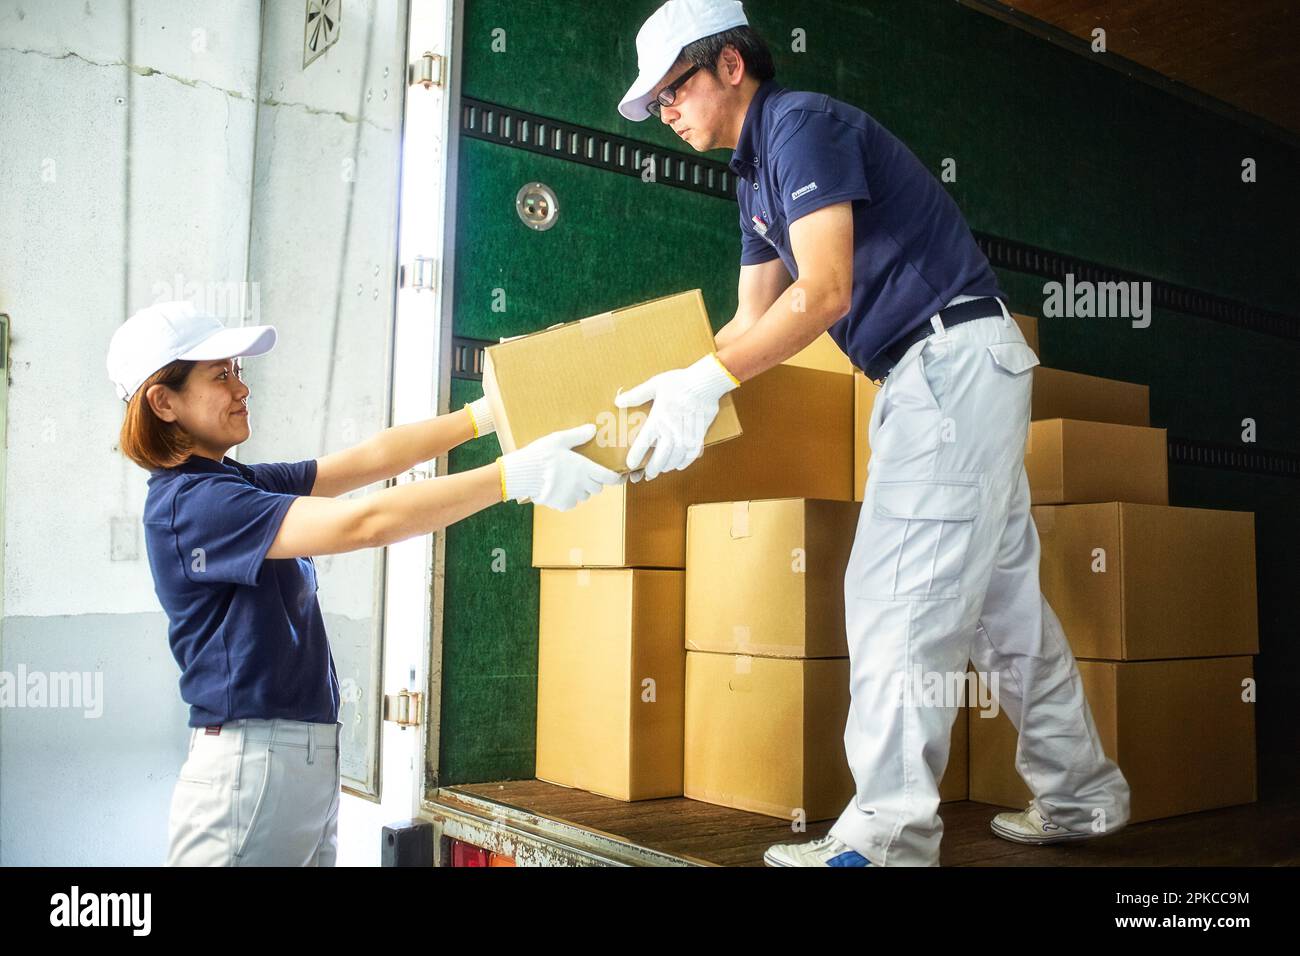 Man and woman in work clothes unloading cardboard boxes from a truck Stock Photo